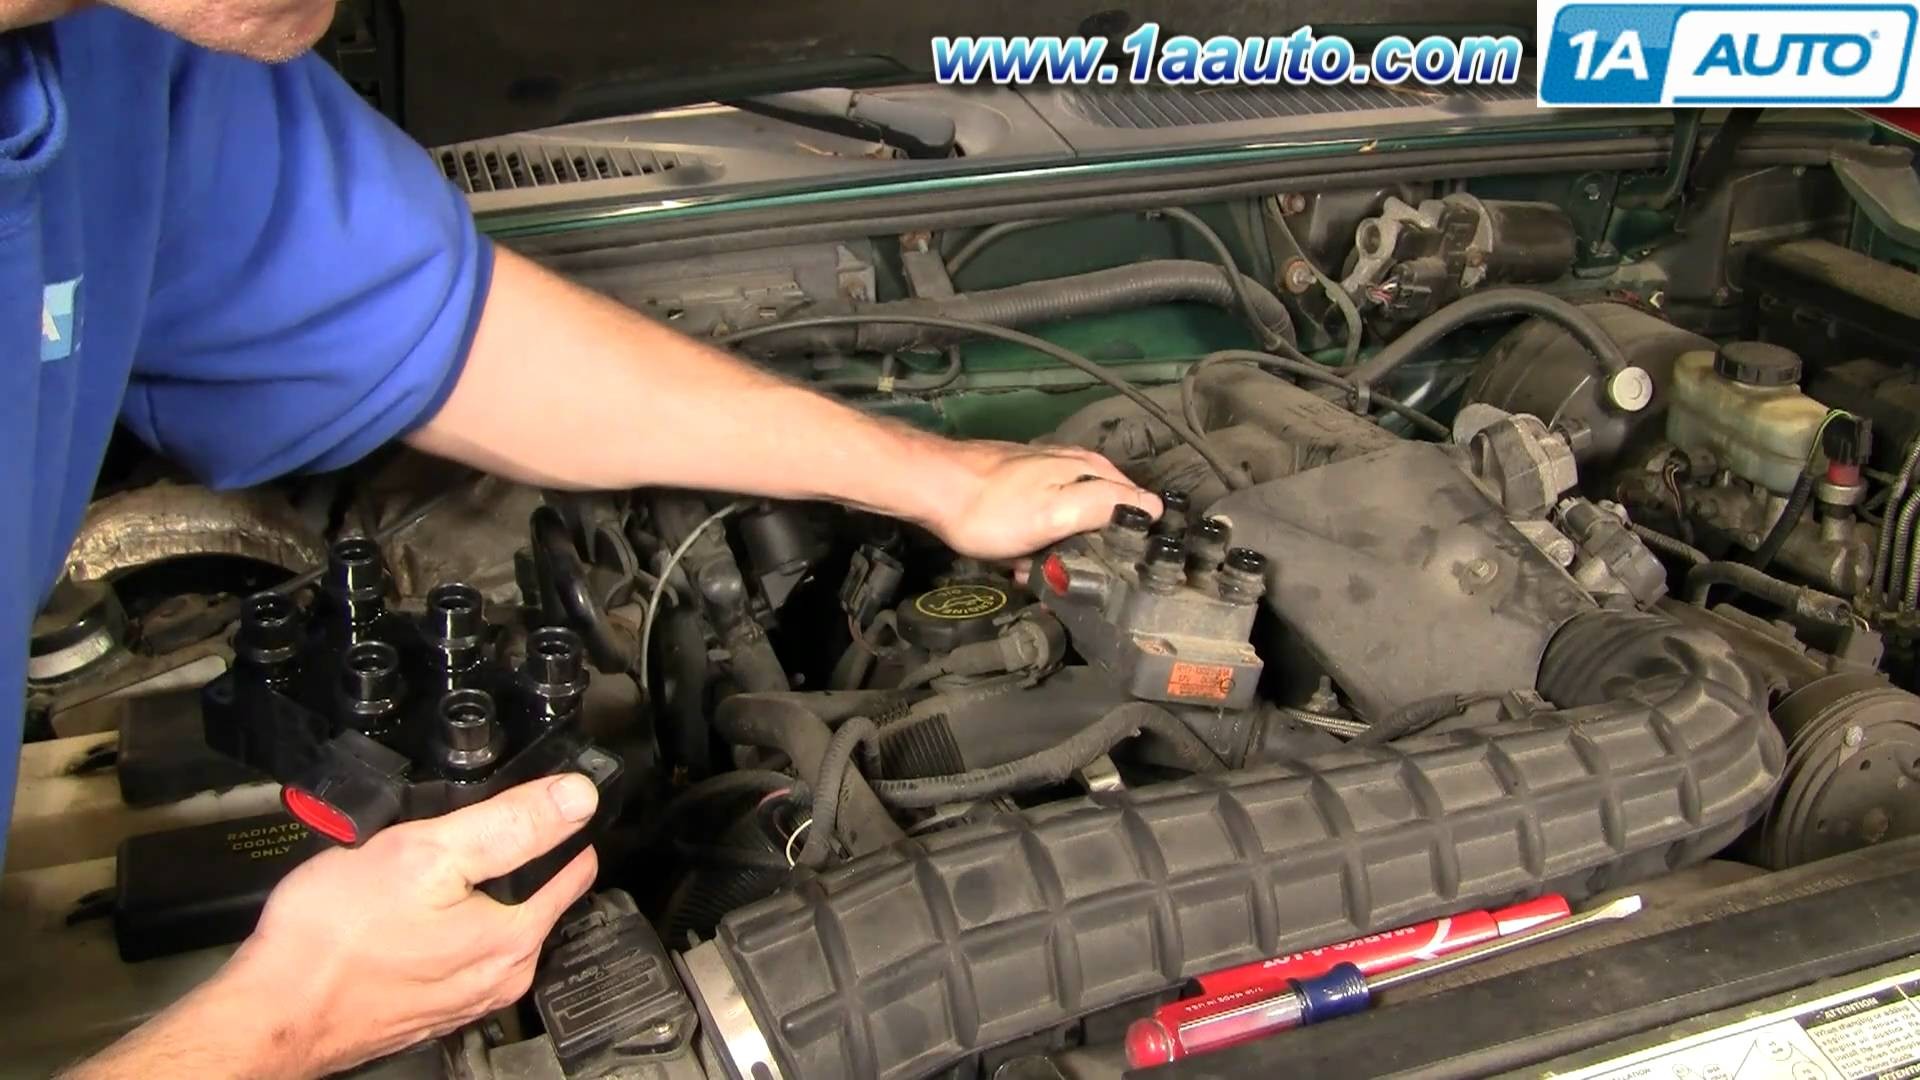 2003 ford Explorer Sport Trac Engine Diagram How to Install Replace Ignition Coil ford Explorer Mercury